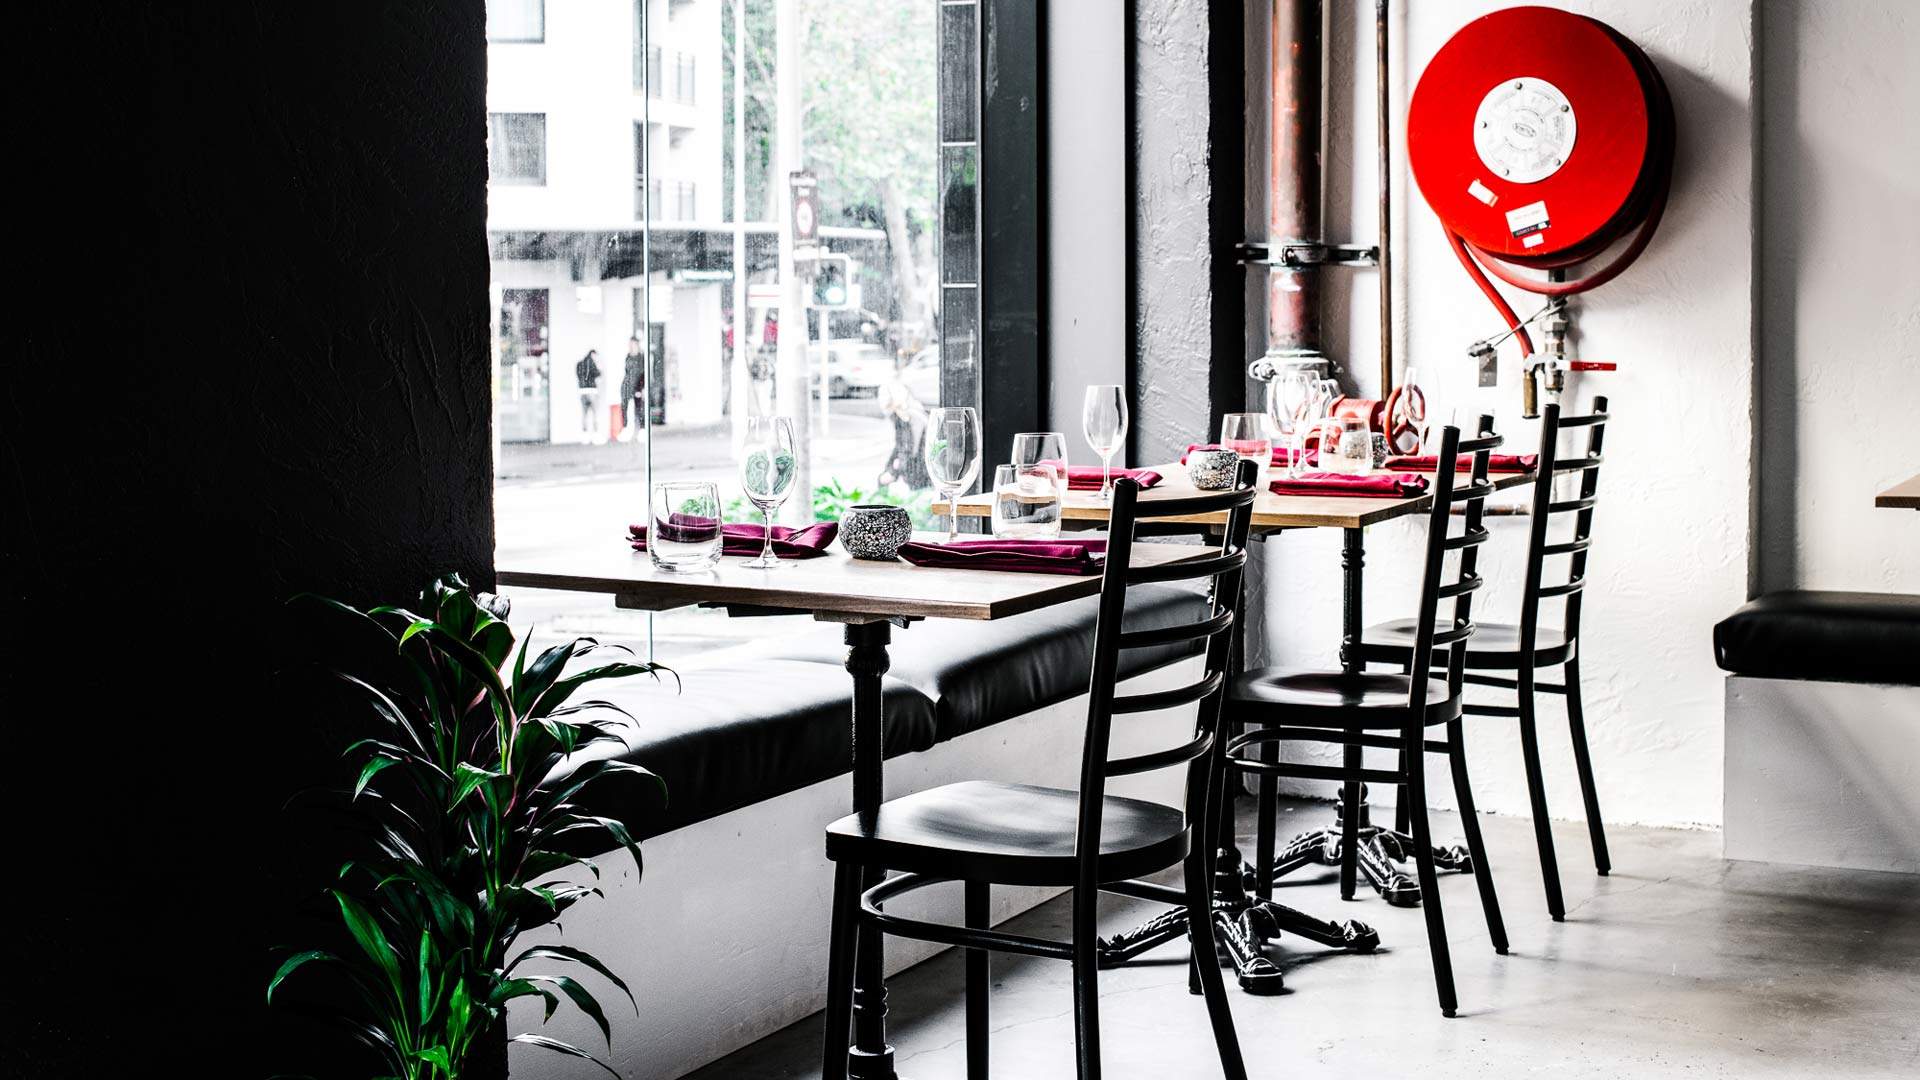 Ortzi Is Surry Hills' New Basque-Inspired Eatery from the Sagra Team